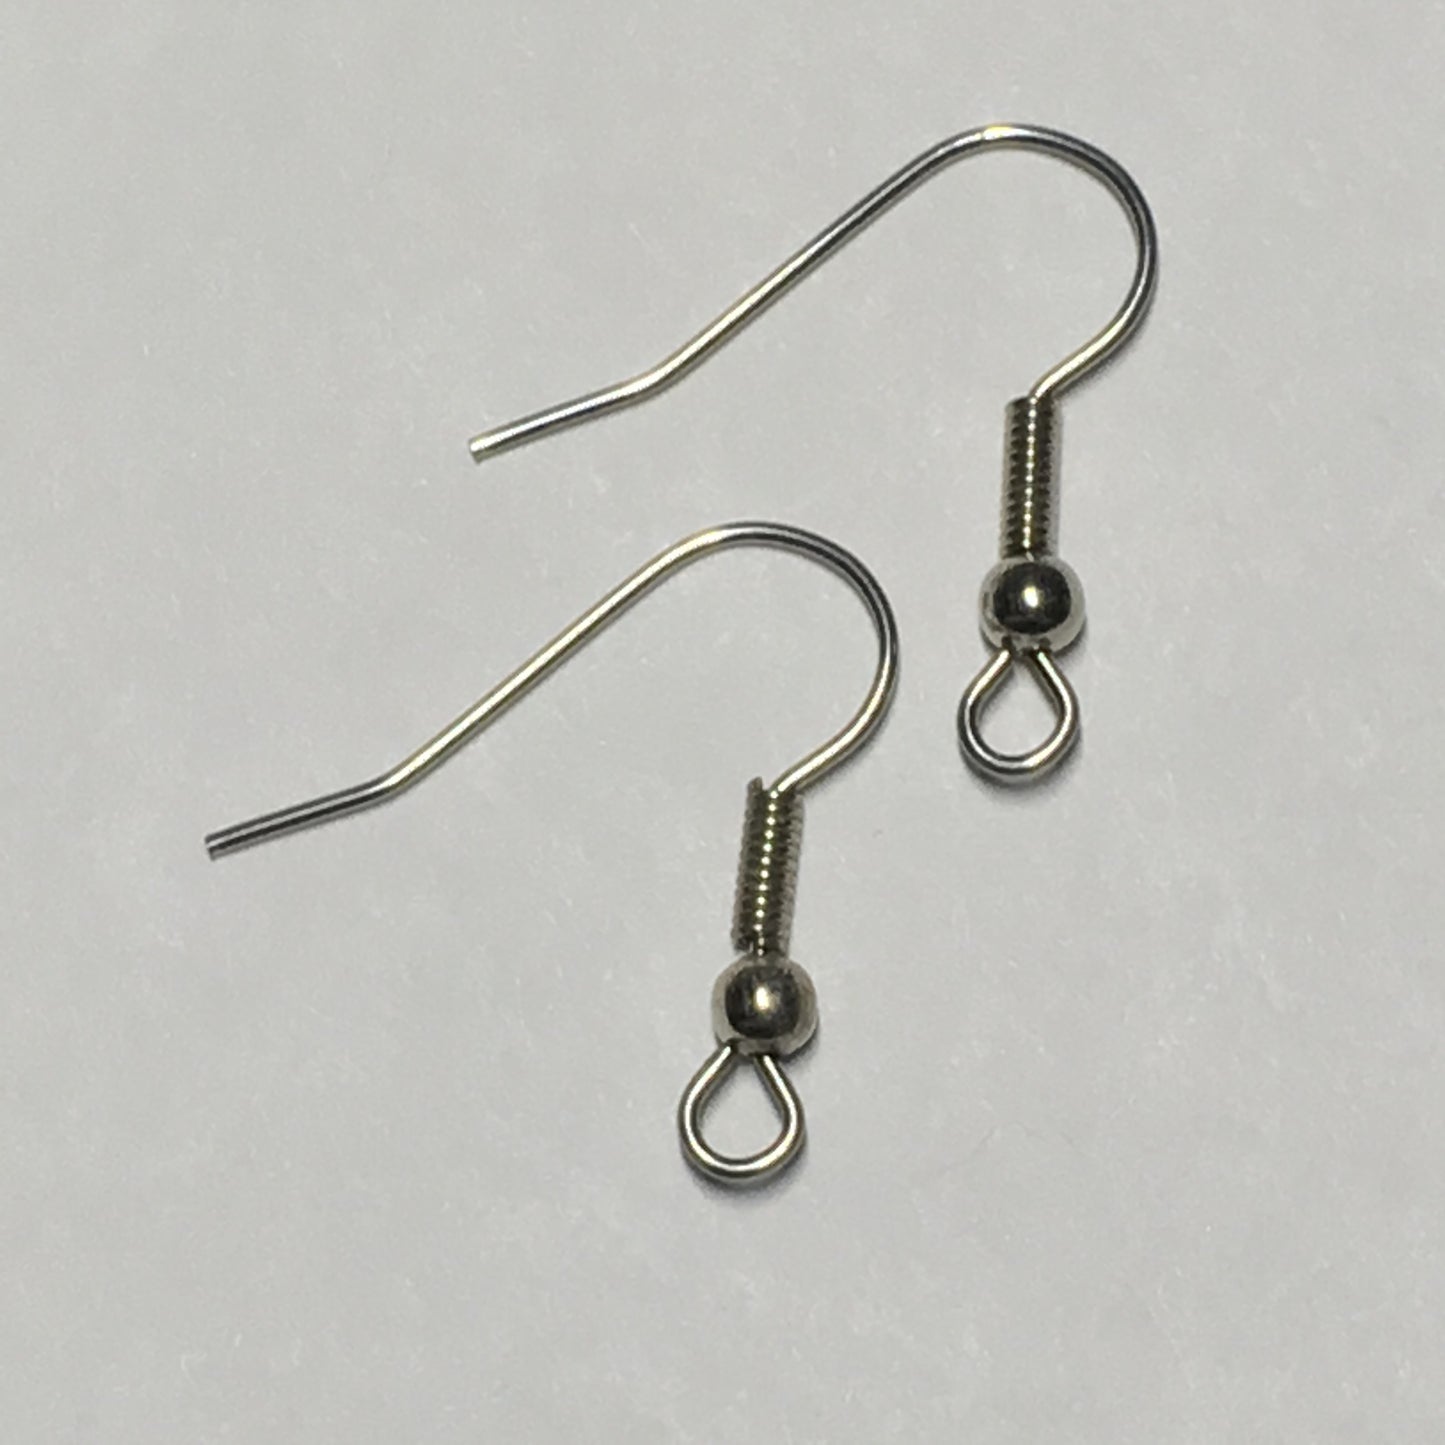 21-Gauge 23 mm Stainless Steel Hypoallergenic French Fish Hook Ear Wires - 1 or 5 Pair